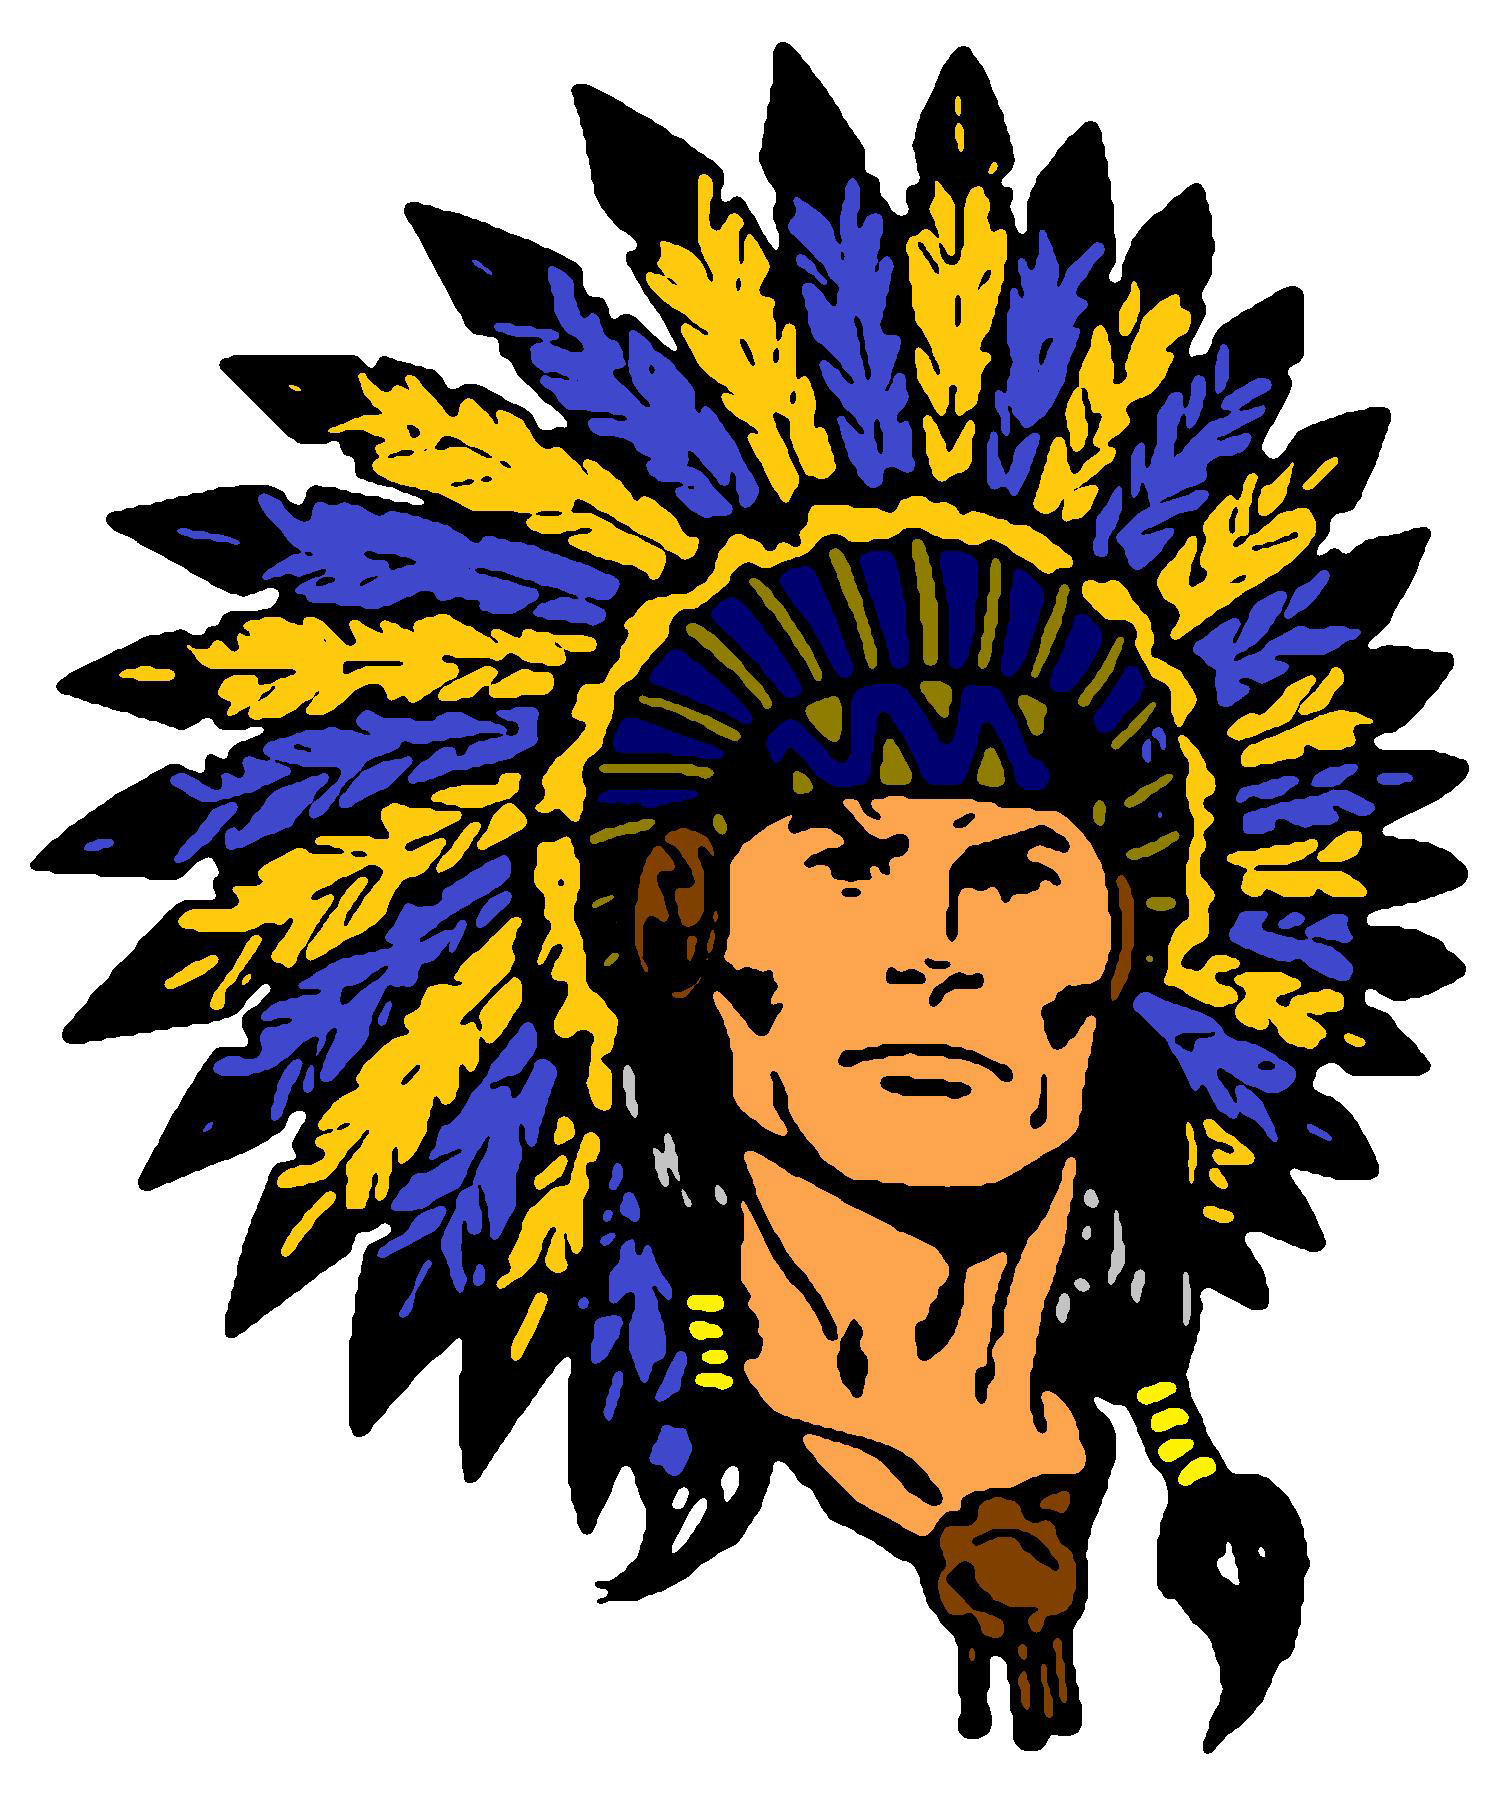 Clipart of the Indian Warrior logo free image.